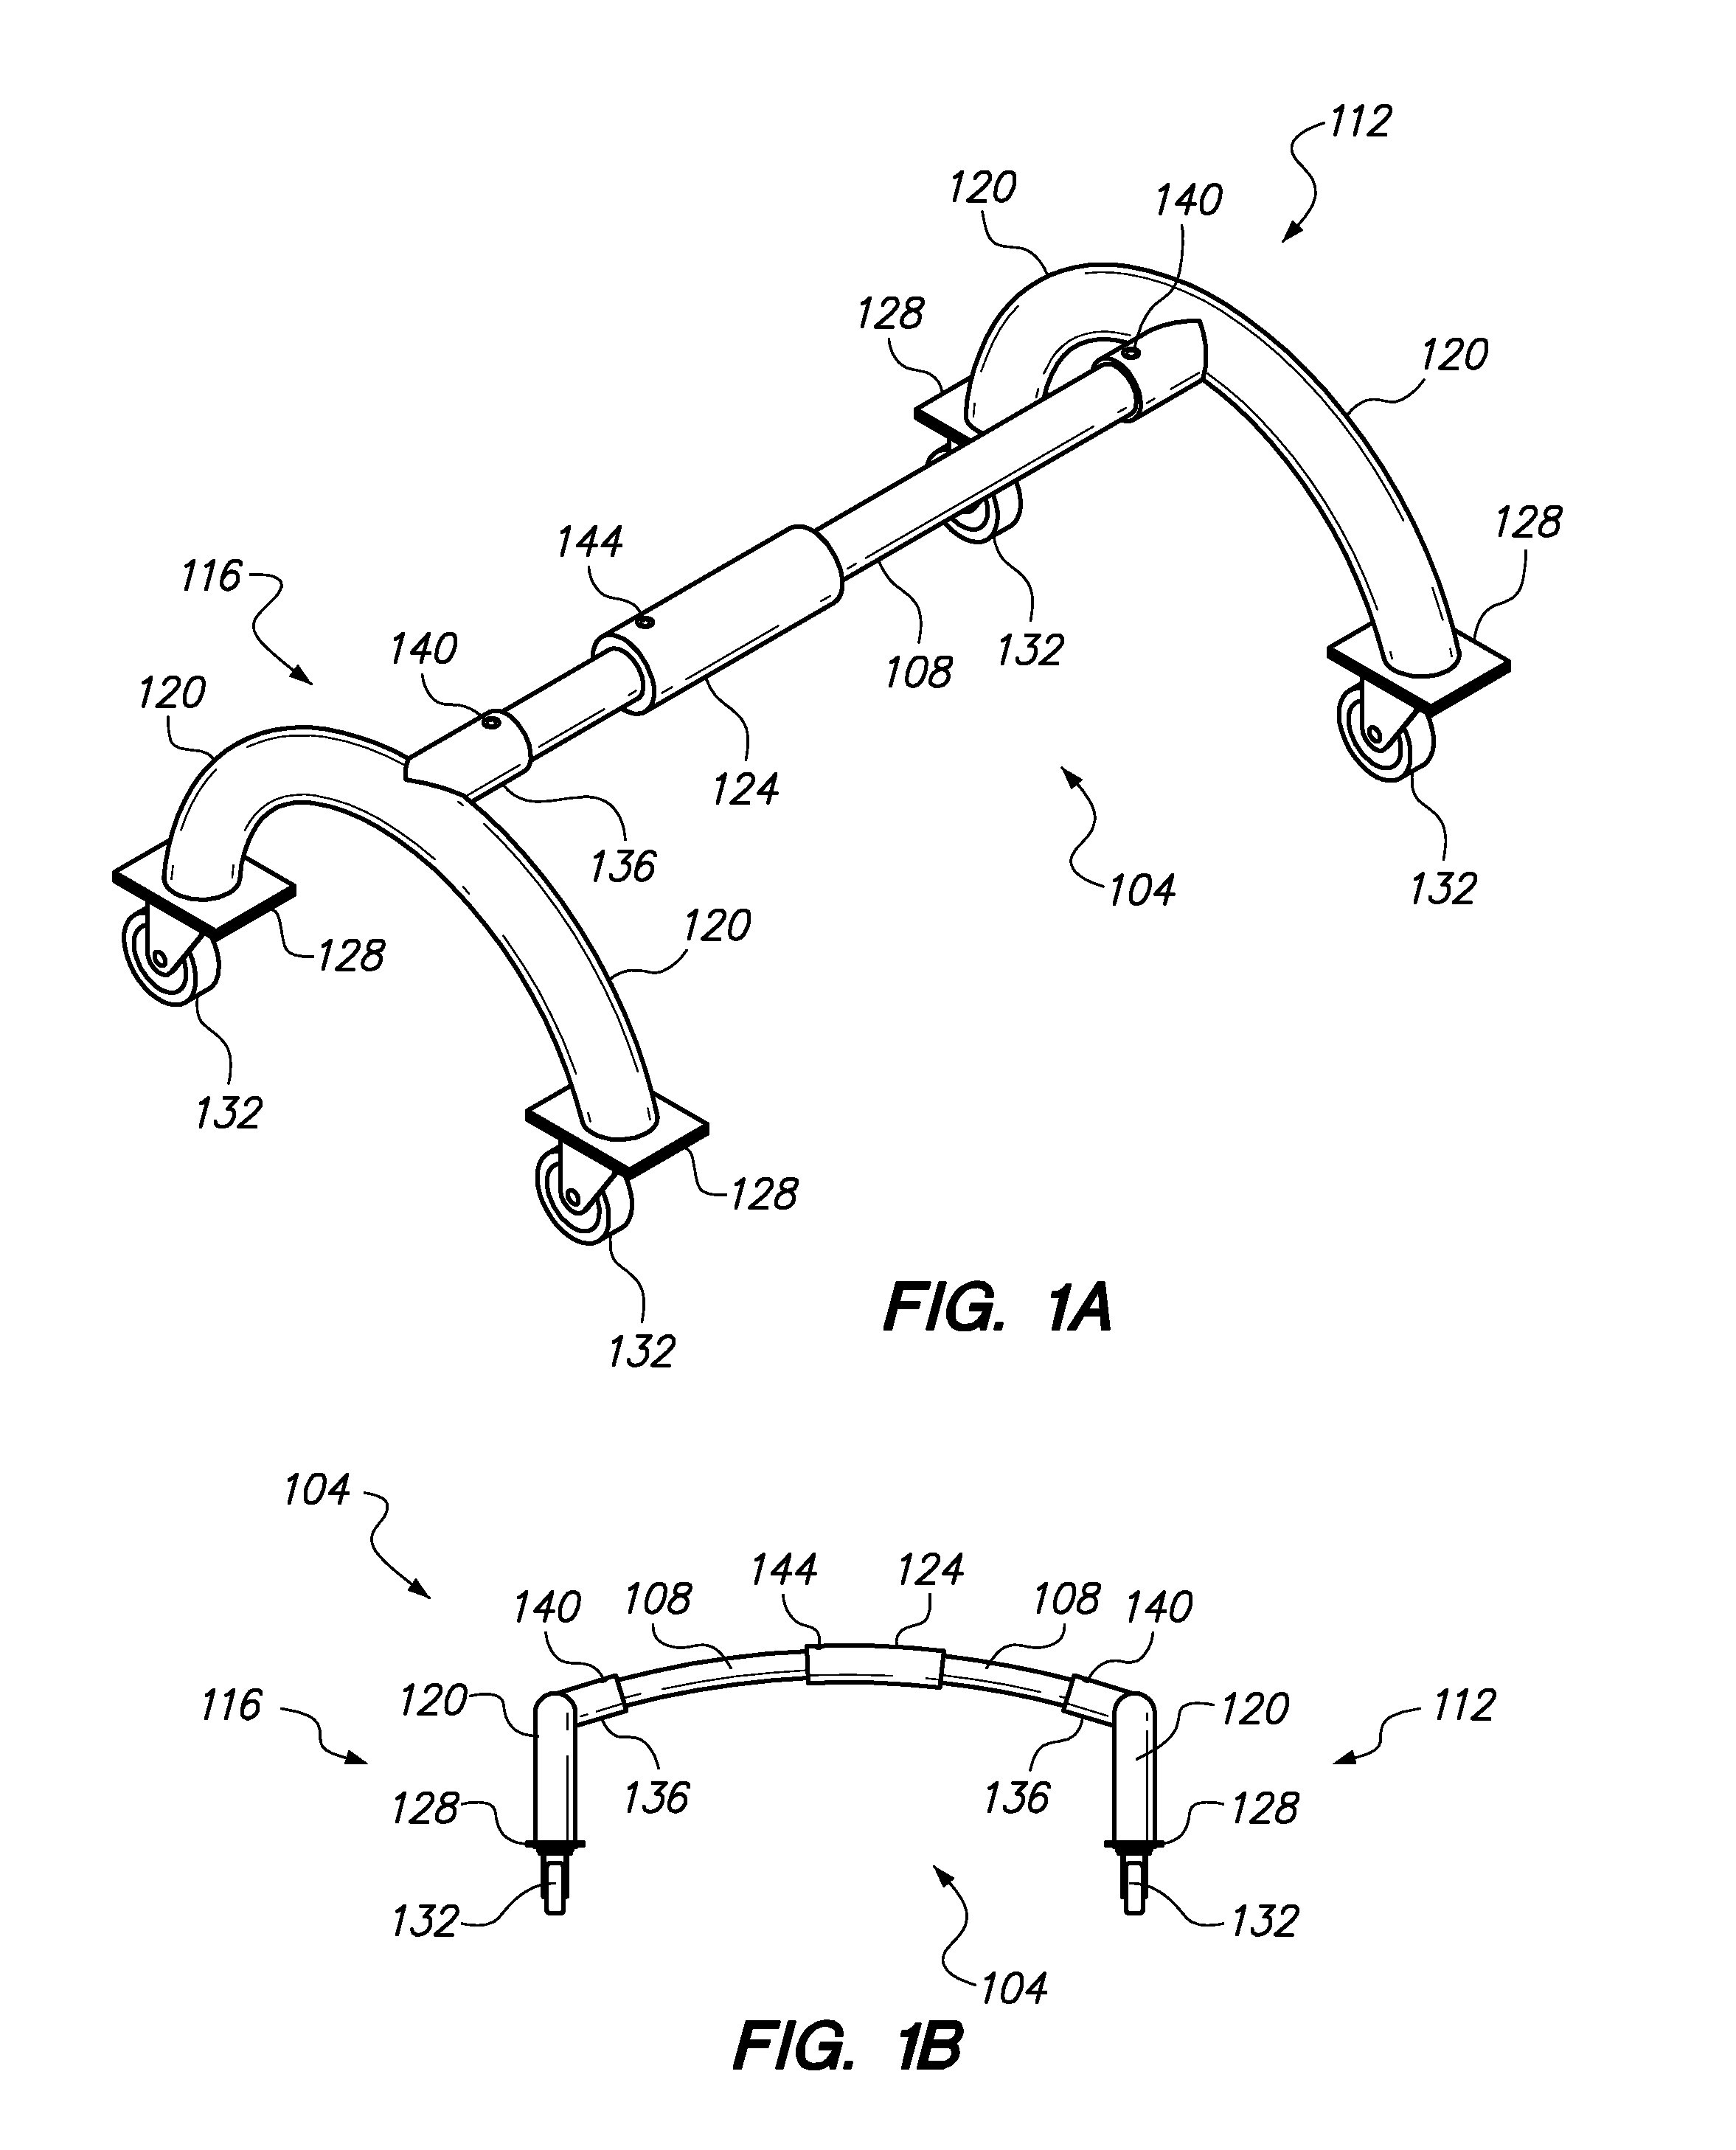 Upper body workout apparatuses and assembly thereof